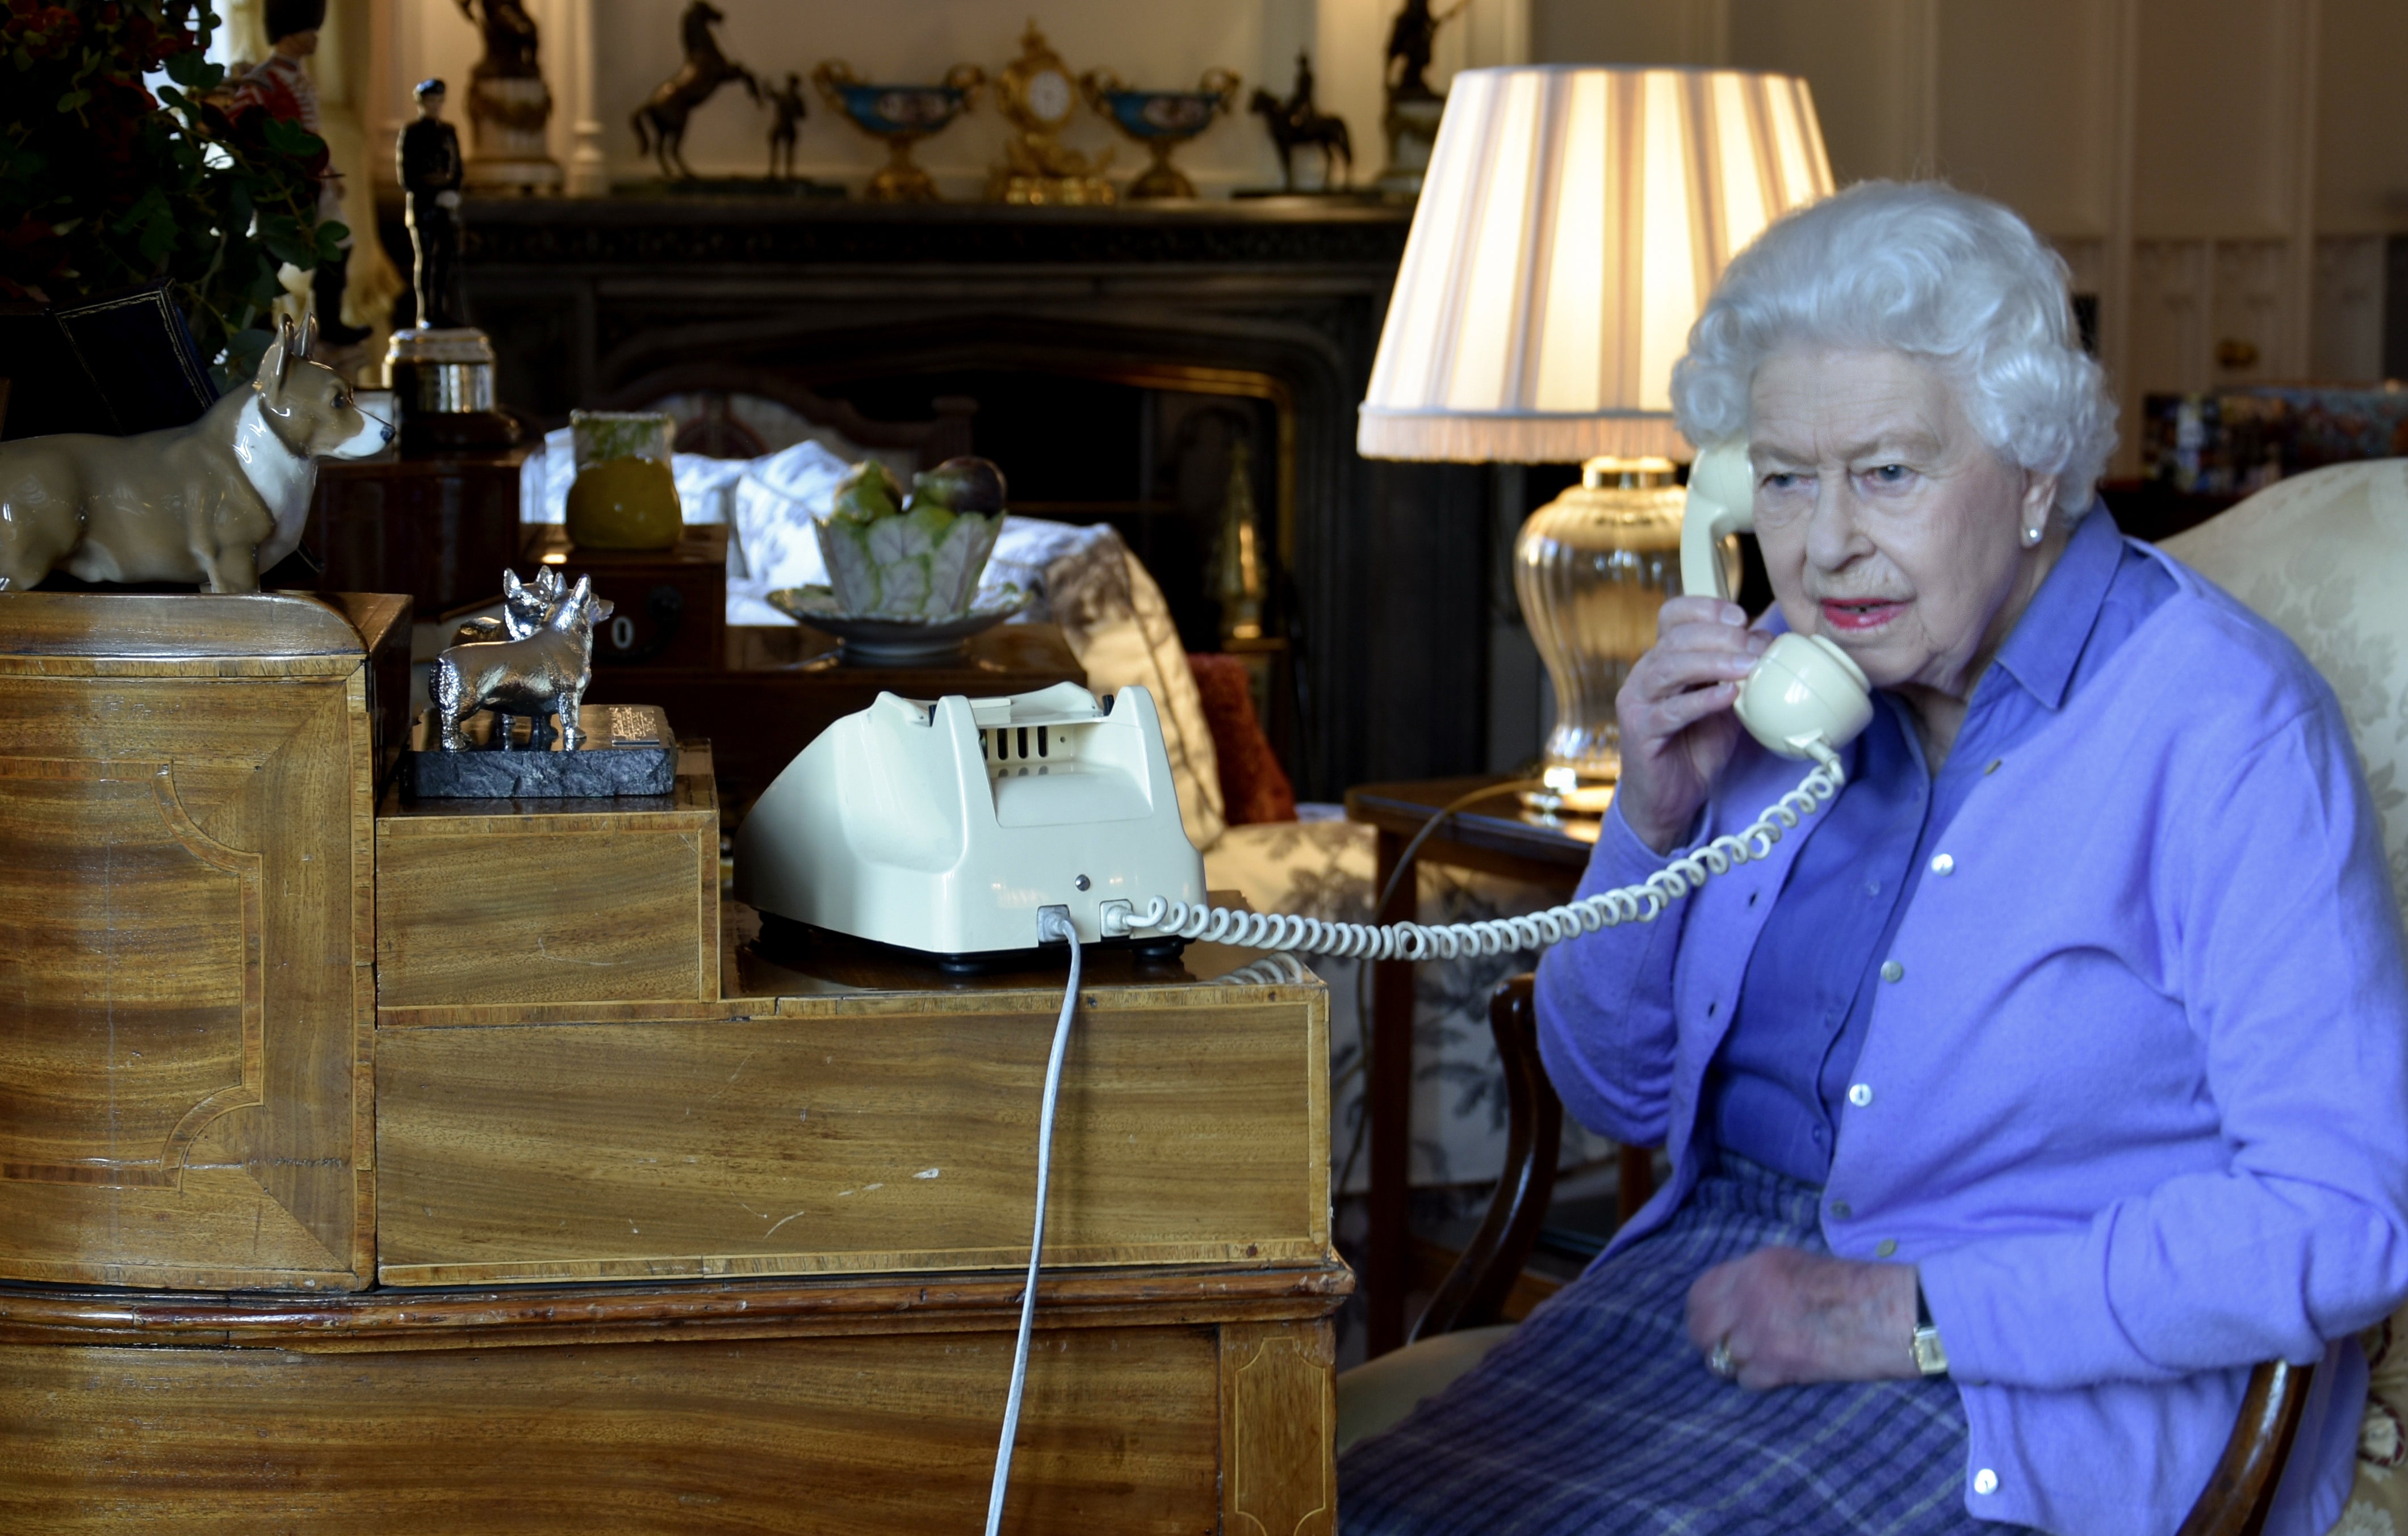 The Queen speaking to Prime Minister Boris Johnson from Windsor Castle in 2020 during the pandemic (Buckingham Palace/PA)